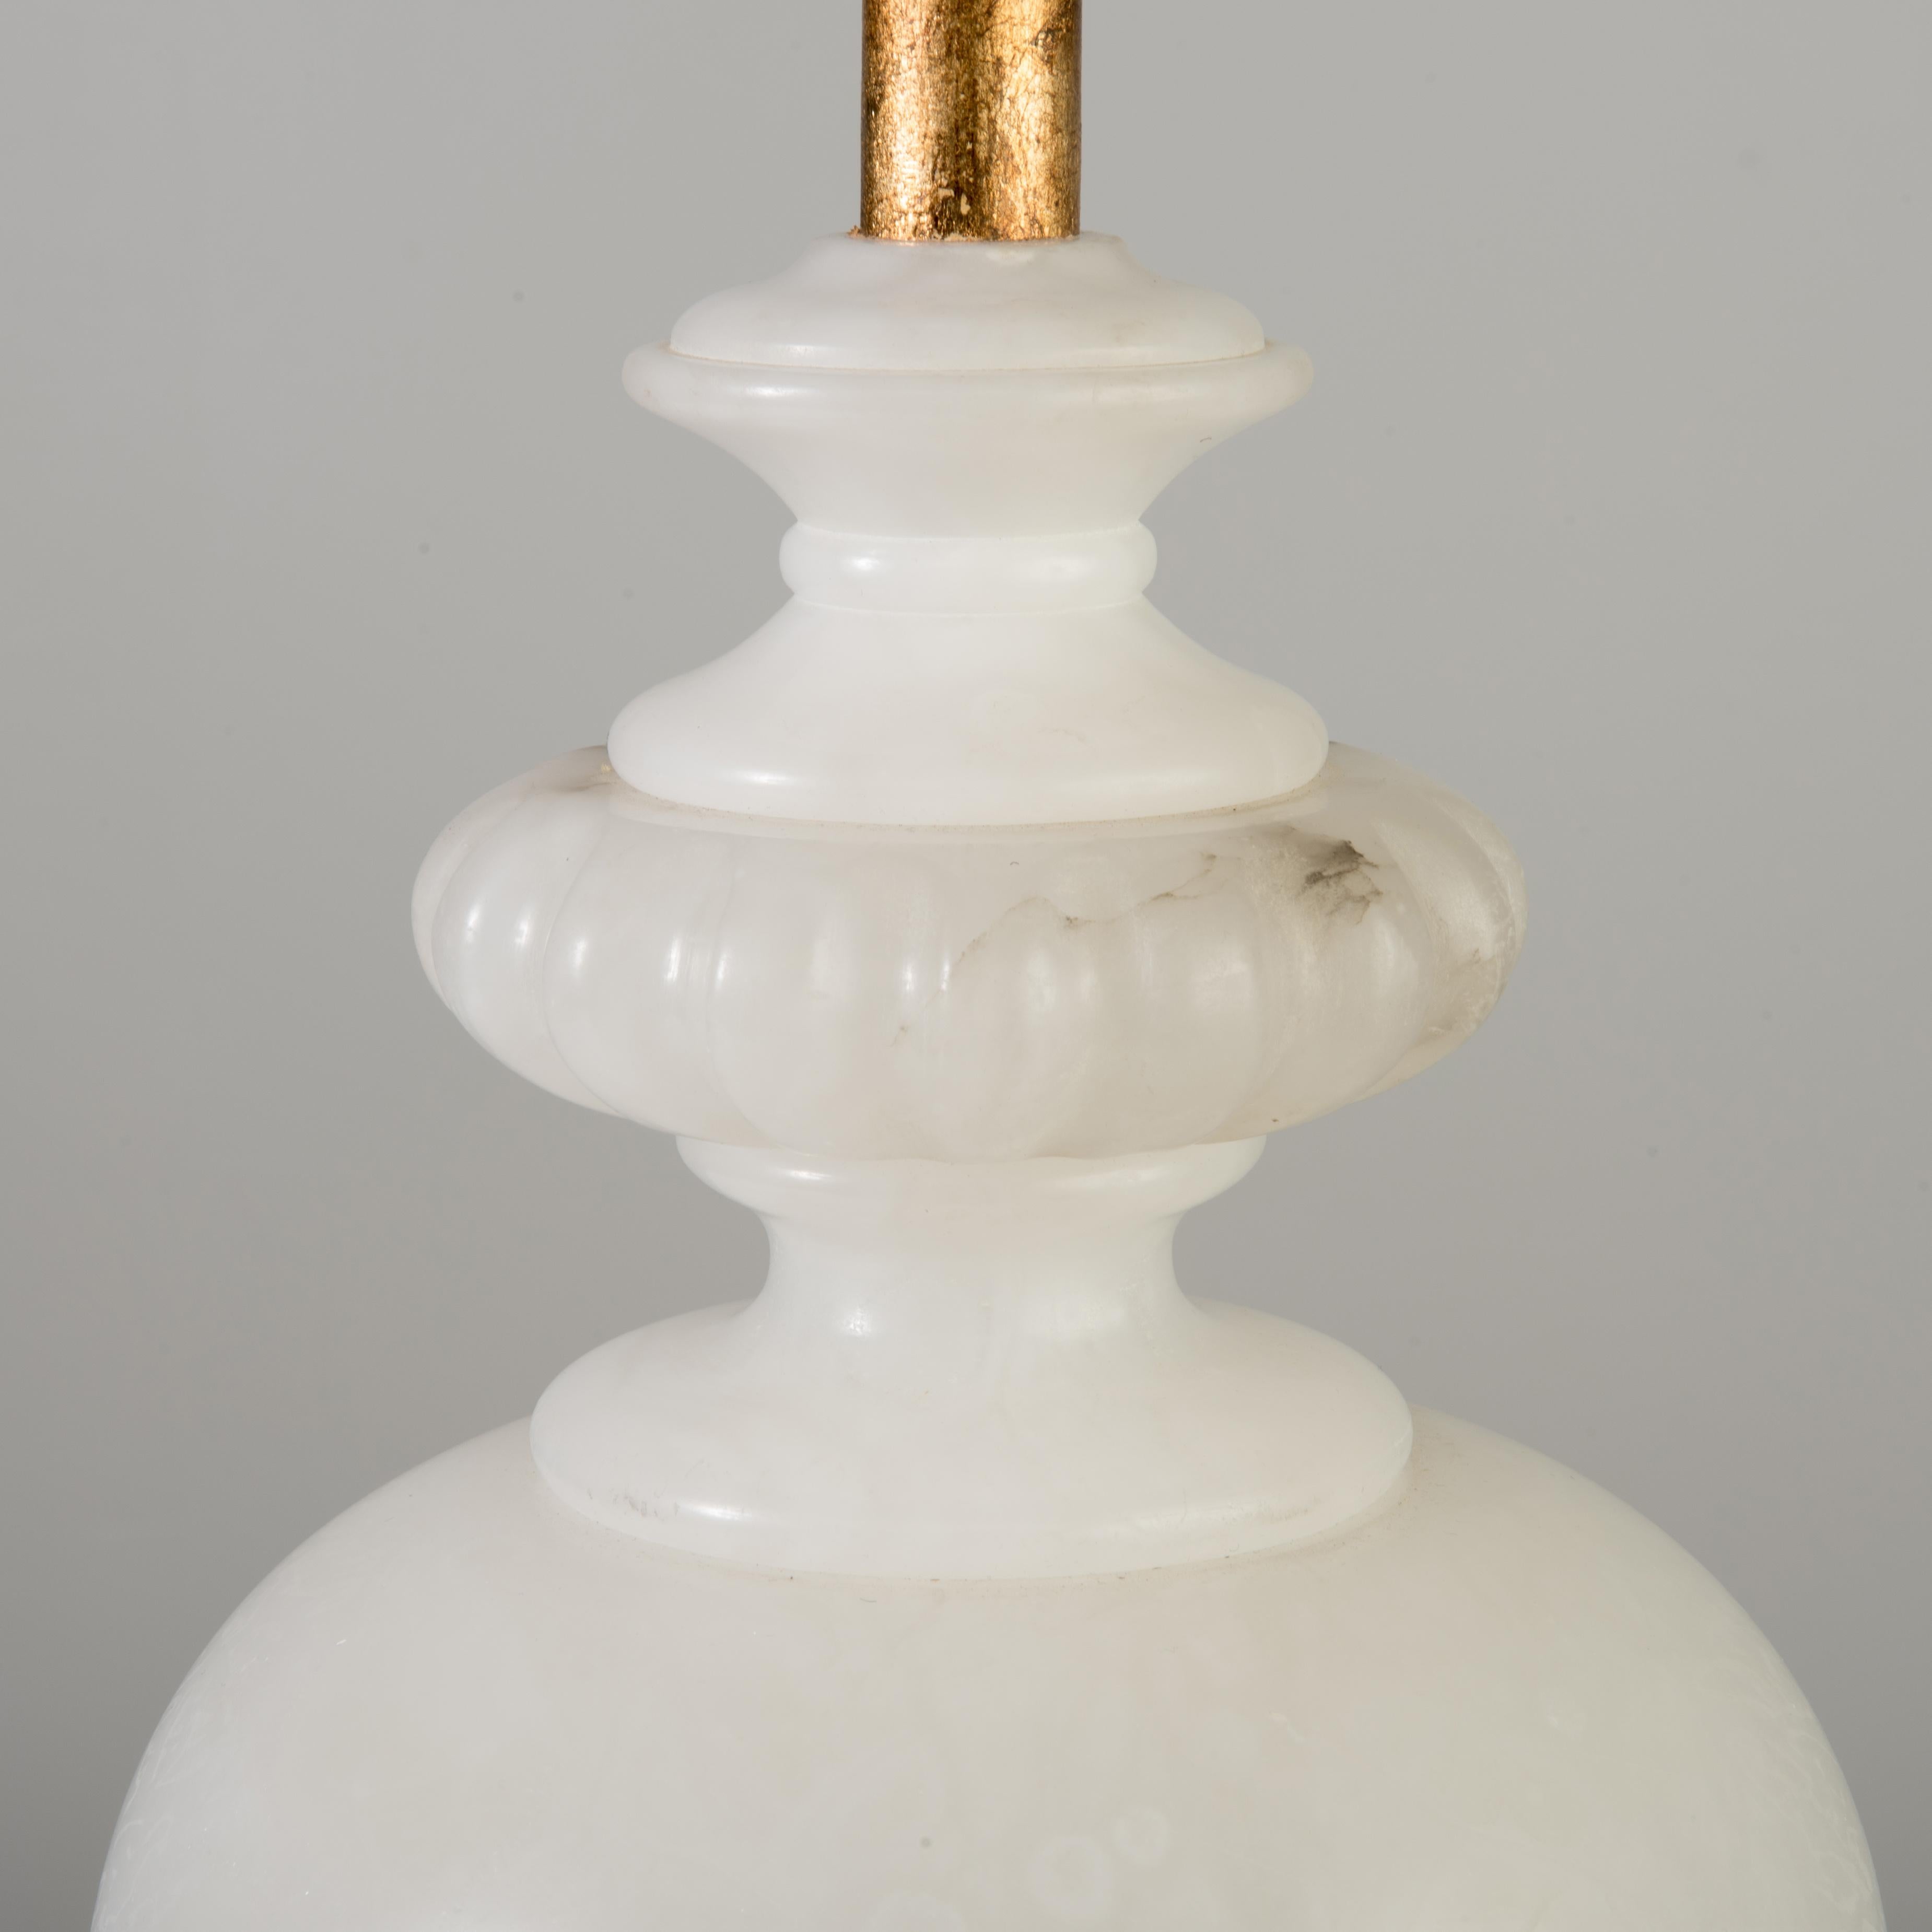 1950s Italian Neoclassical Alabaster Vase Urn Baluster Marbro Style Lamp For Sale 4